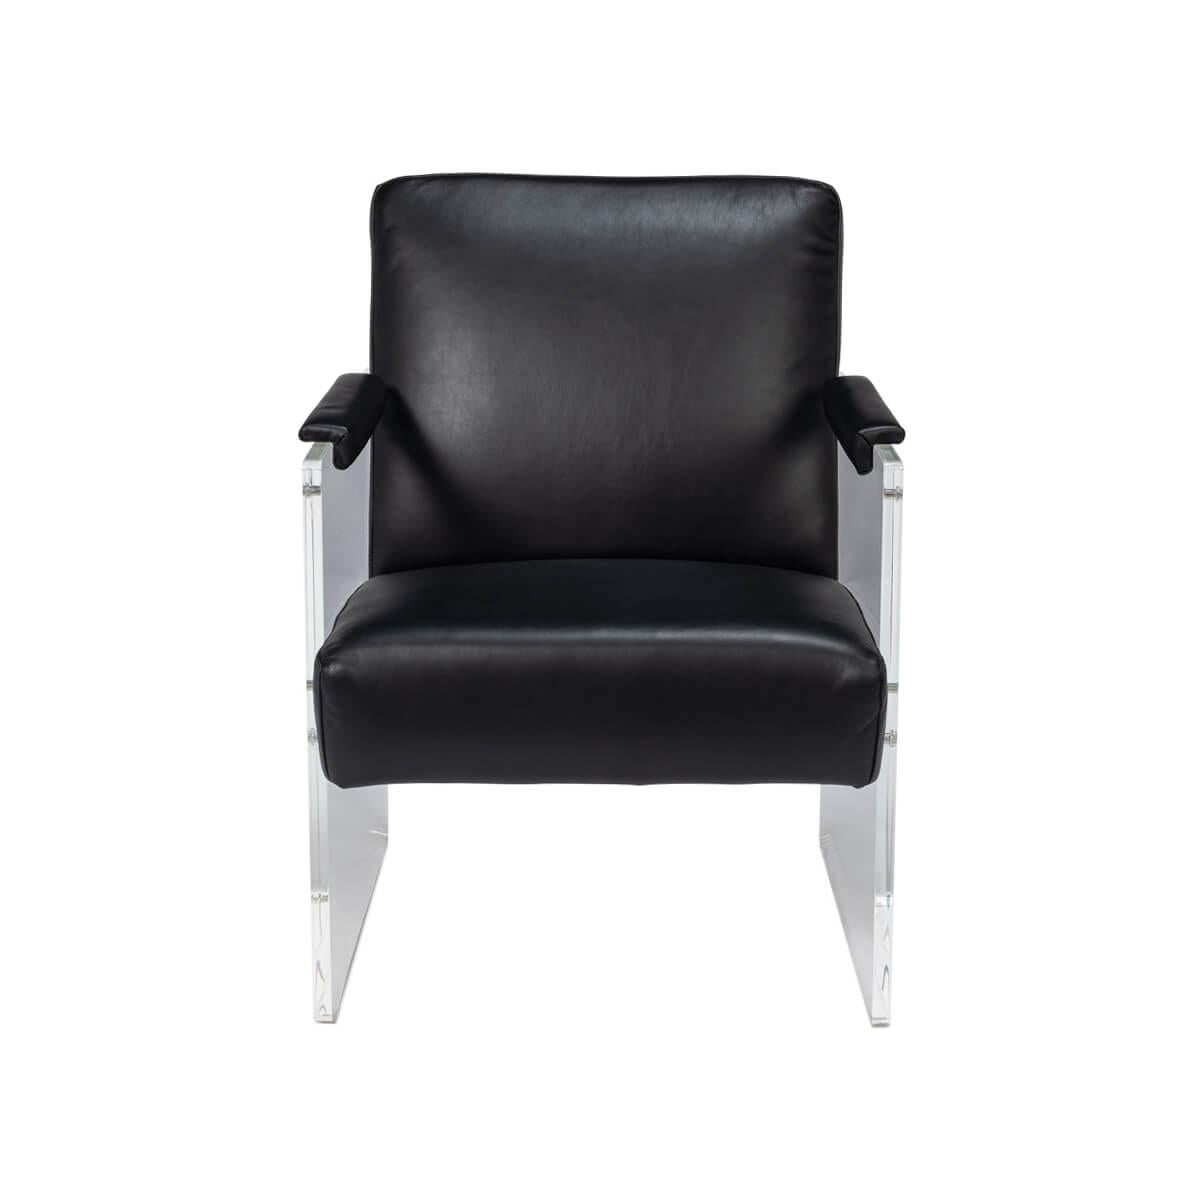 A bold fusion of avant-garde style and classic comfort. This chair features a sleek, onyx black leather seat and backrest that provide a luxurious sitting experience, contrasted with clear acrylic side panels that give the illusion of floating in